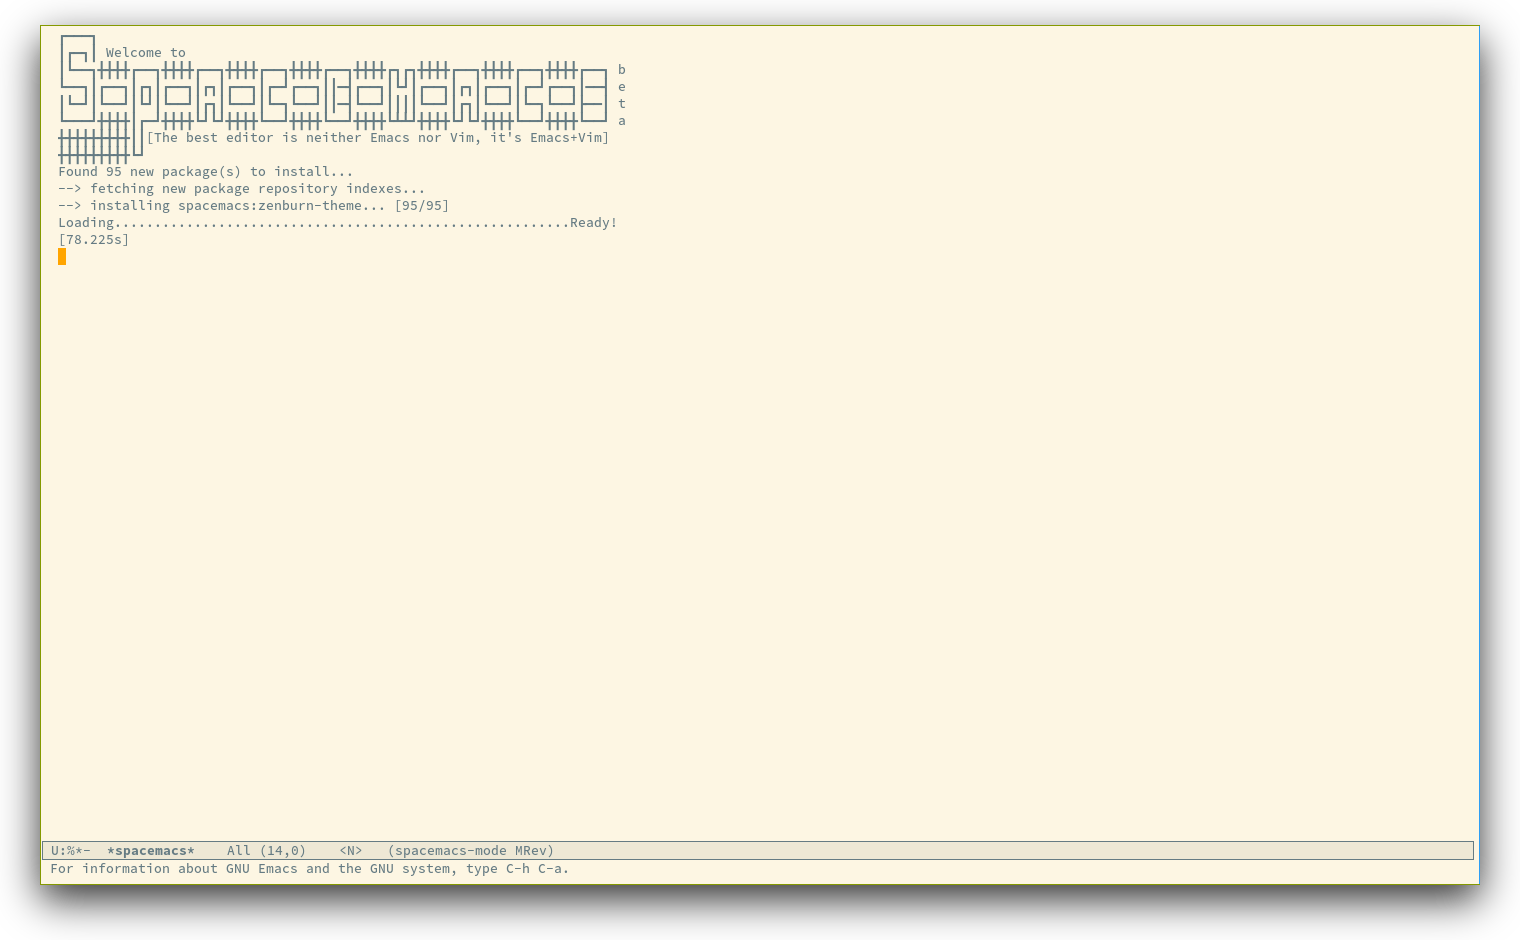 /TakeV/spacemacs/media/commit/fef908acad9406ea89263886c58d69c24a3c25a9/doc/img/spacemacs-startup.png